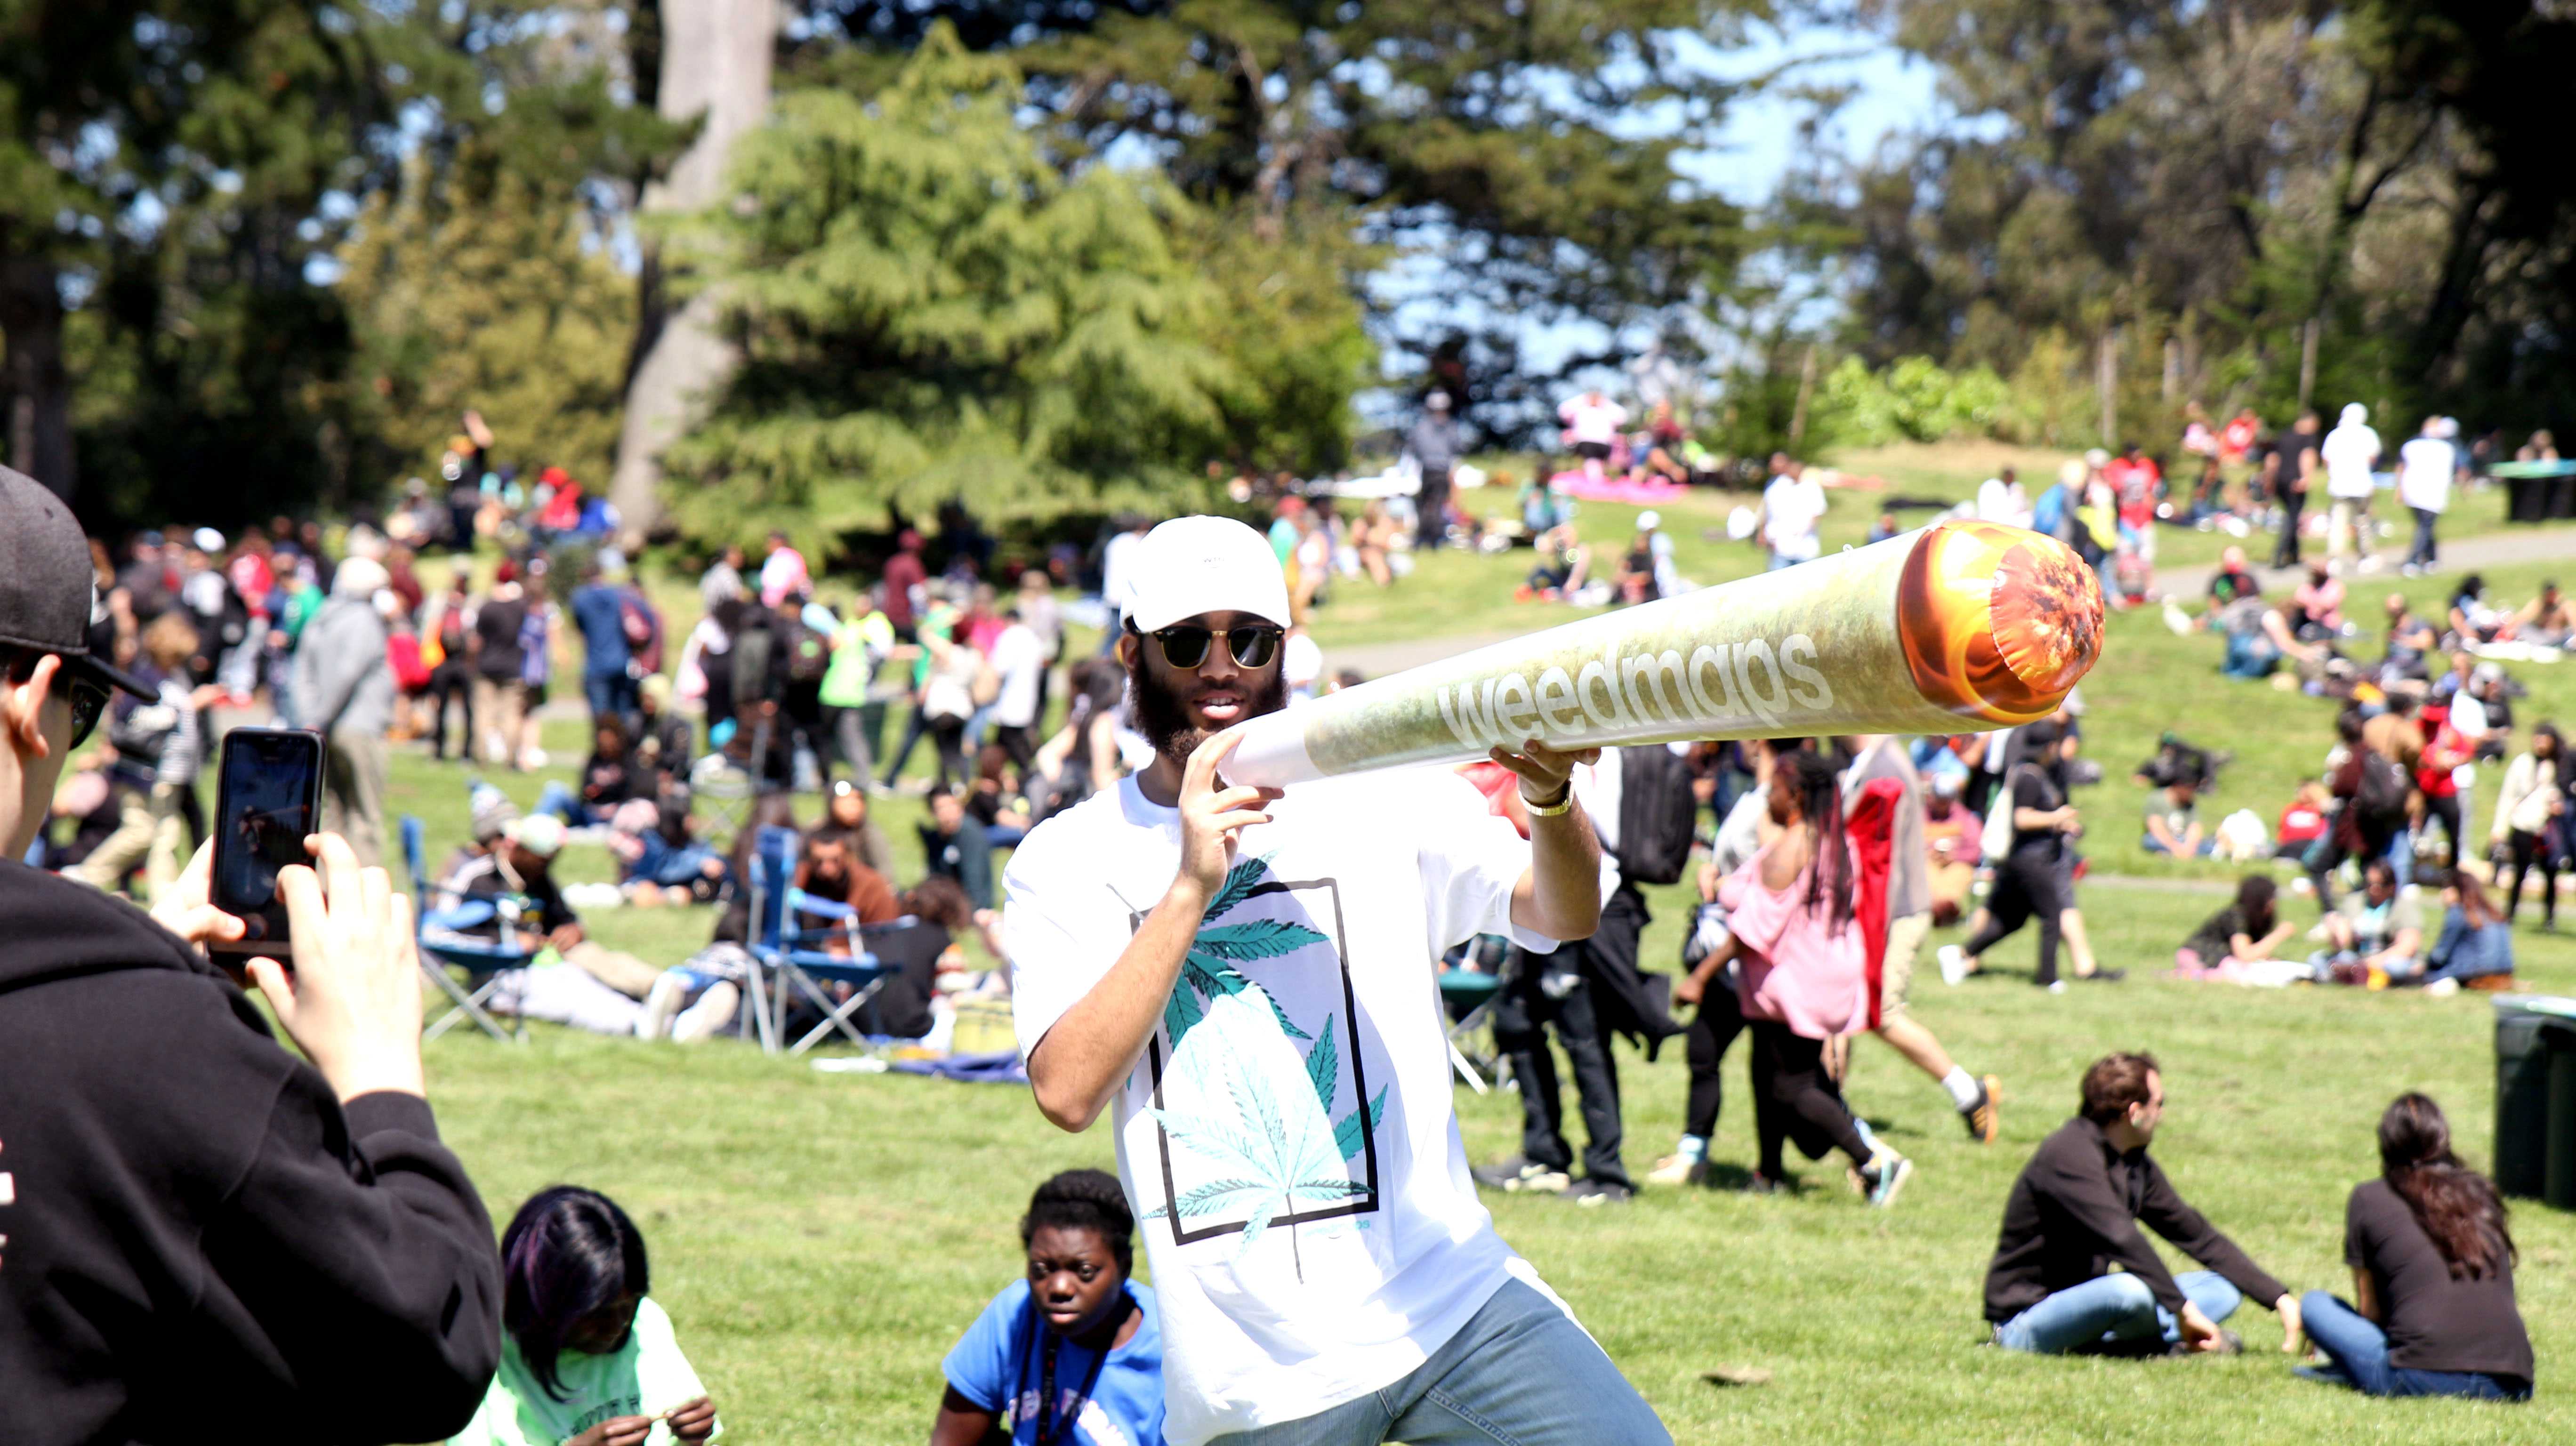 Promoter for Weed maps Chris J. blowing up a joint at the 420 event at Hippie Hill on April 20. 2018 (Golden Gate Express)